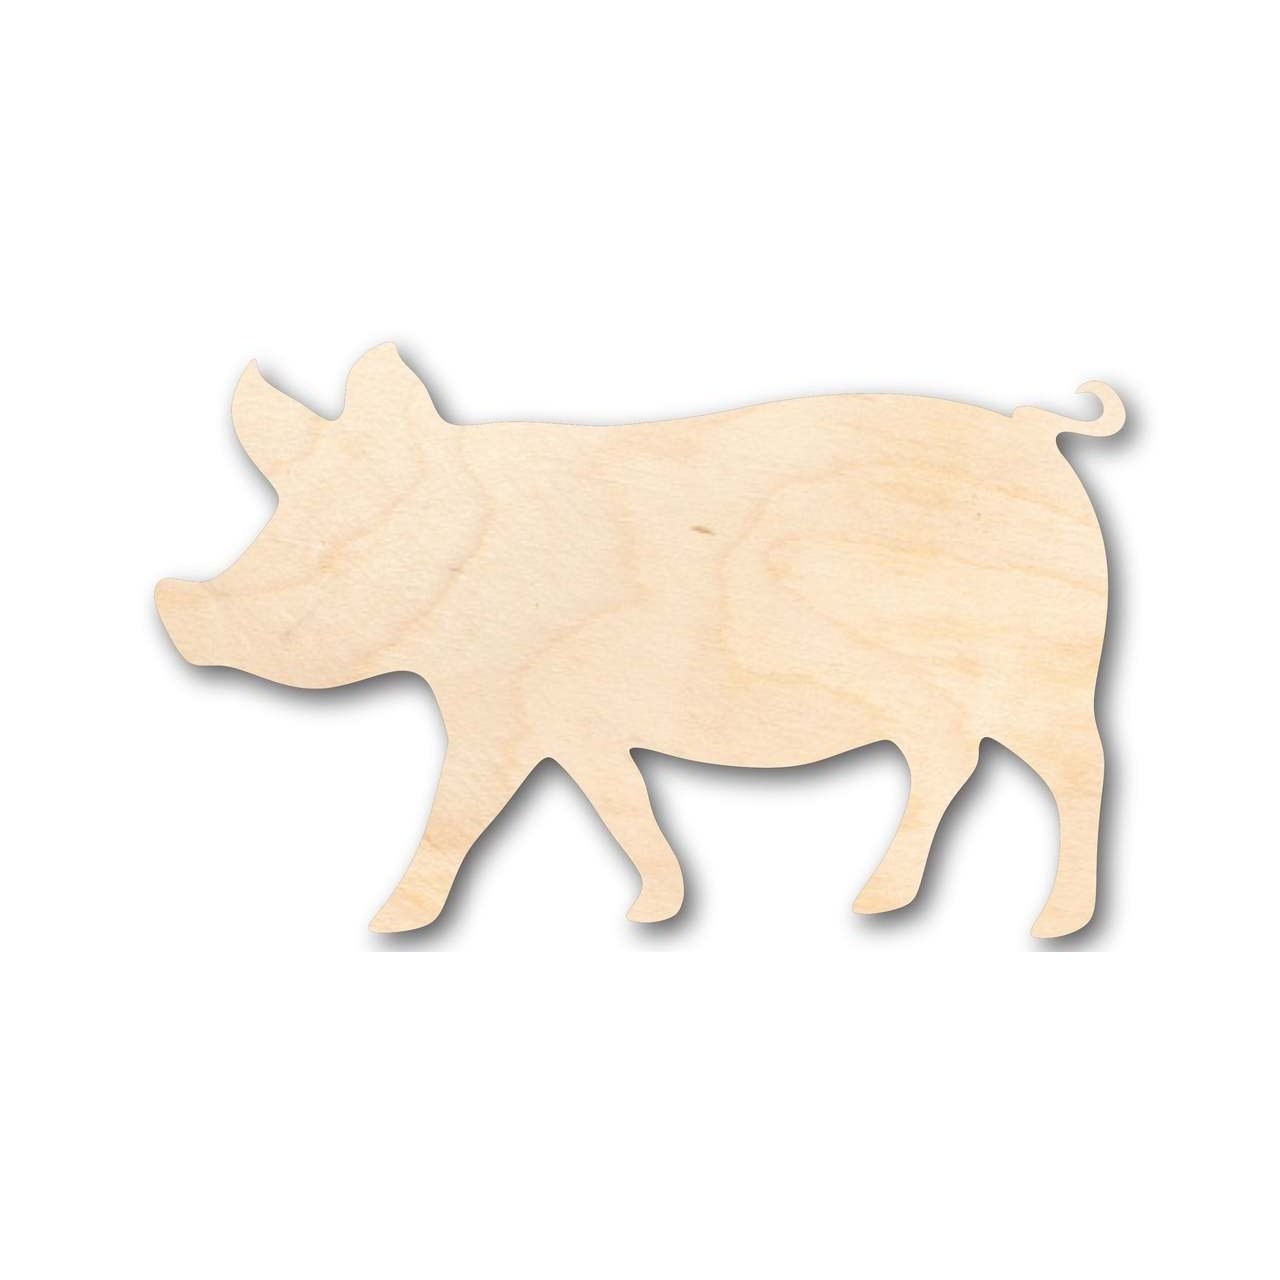 Unfinished Wooden Pig Shape - Farm Animal - Craft - up to 24